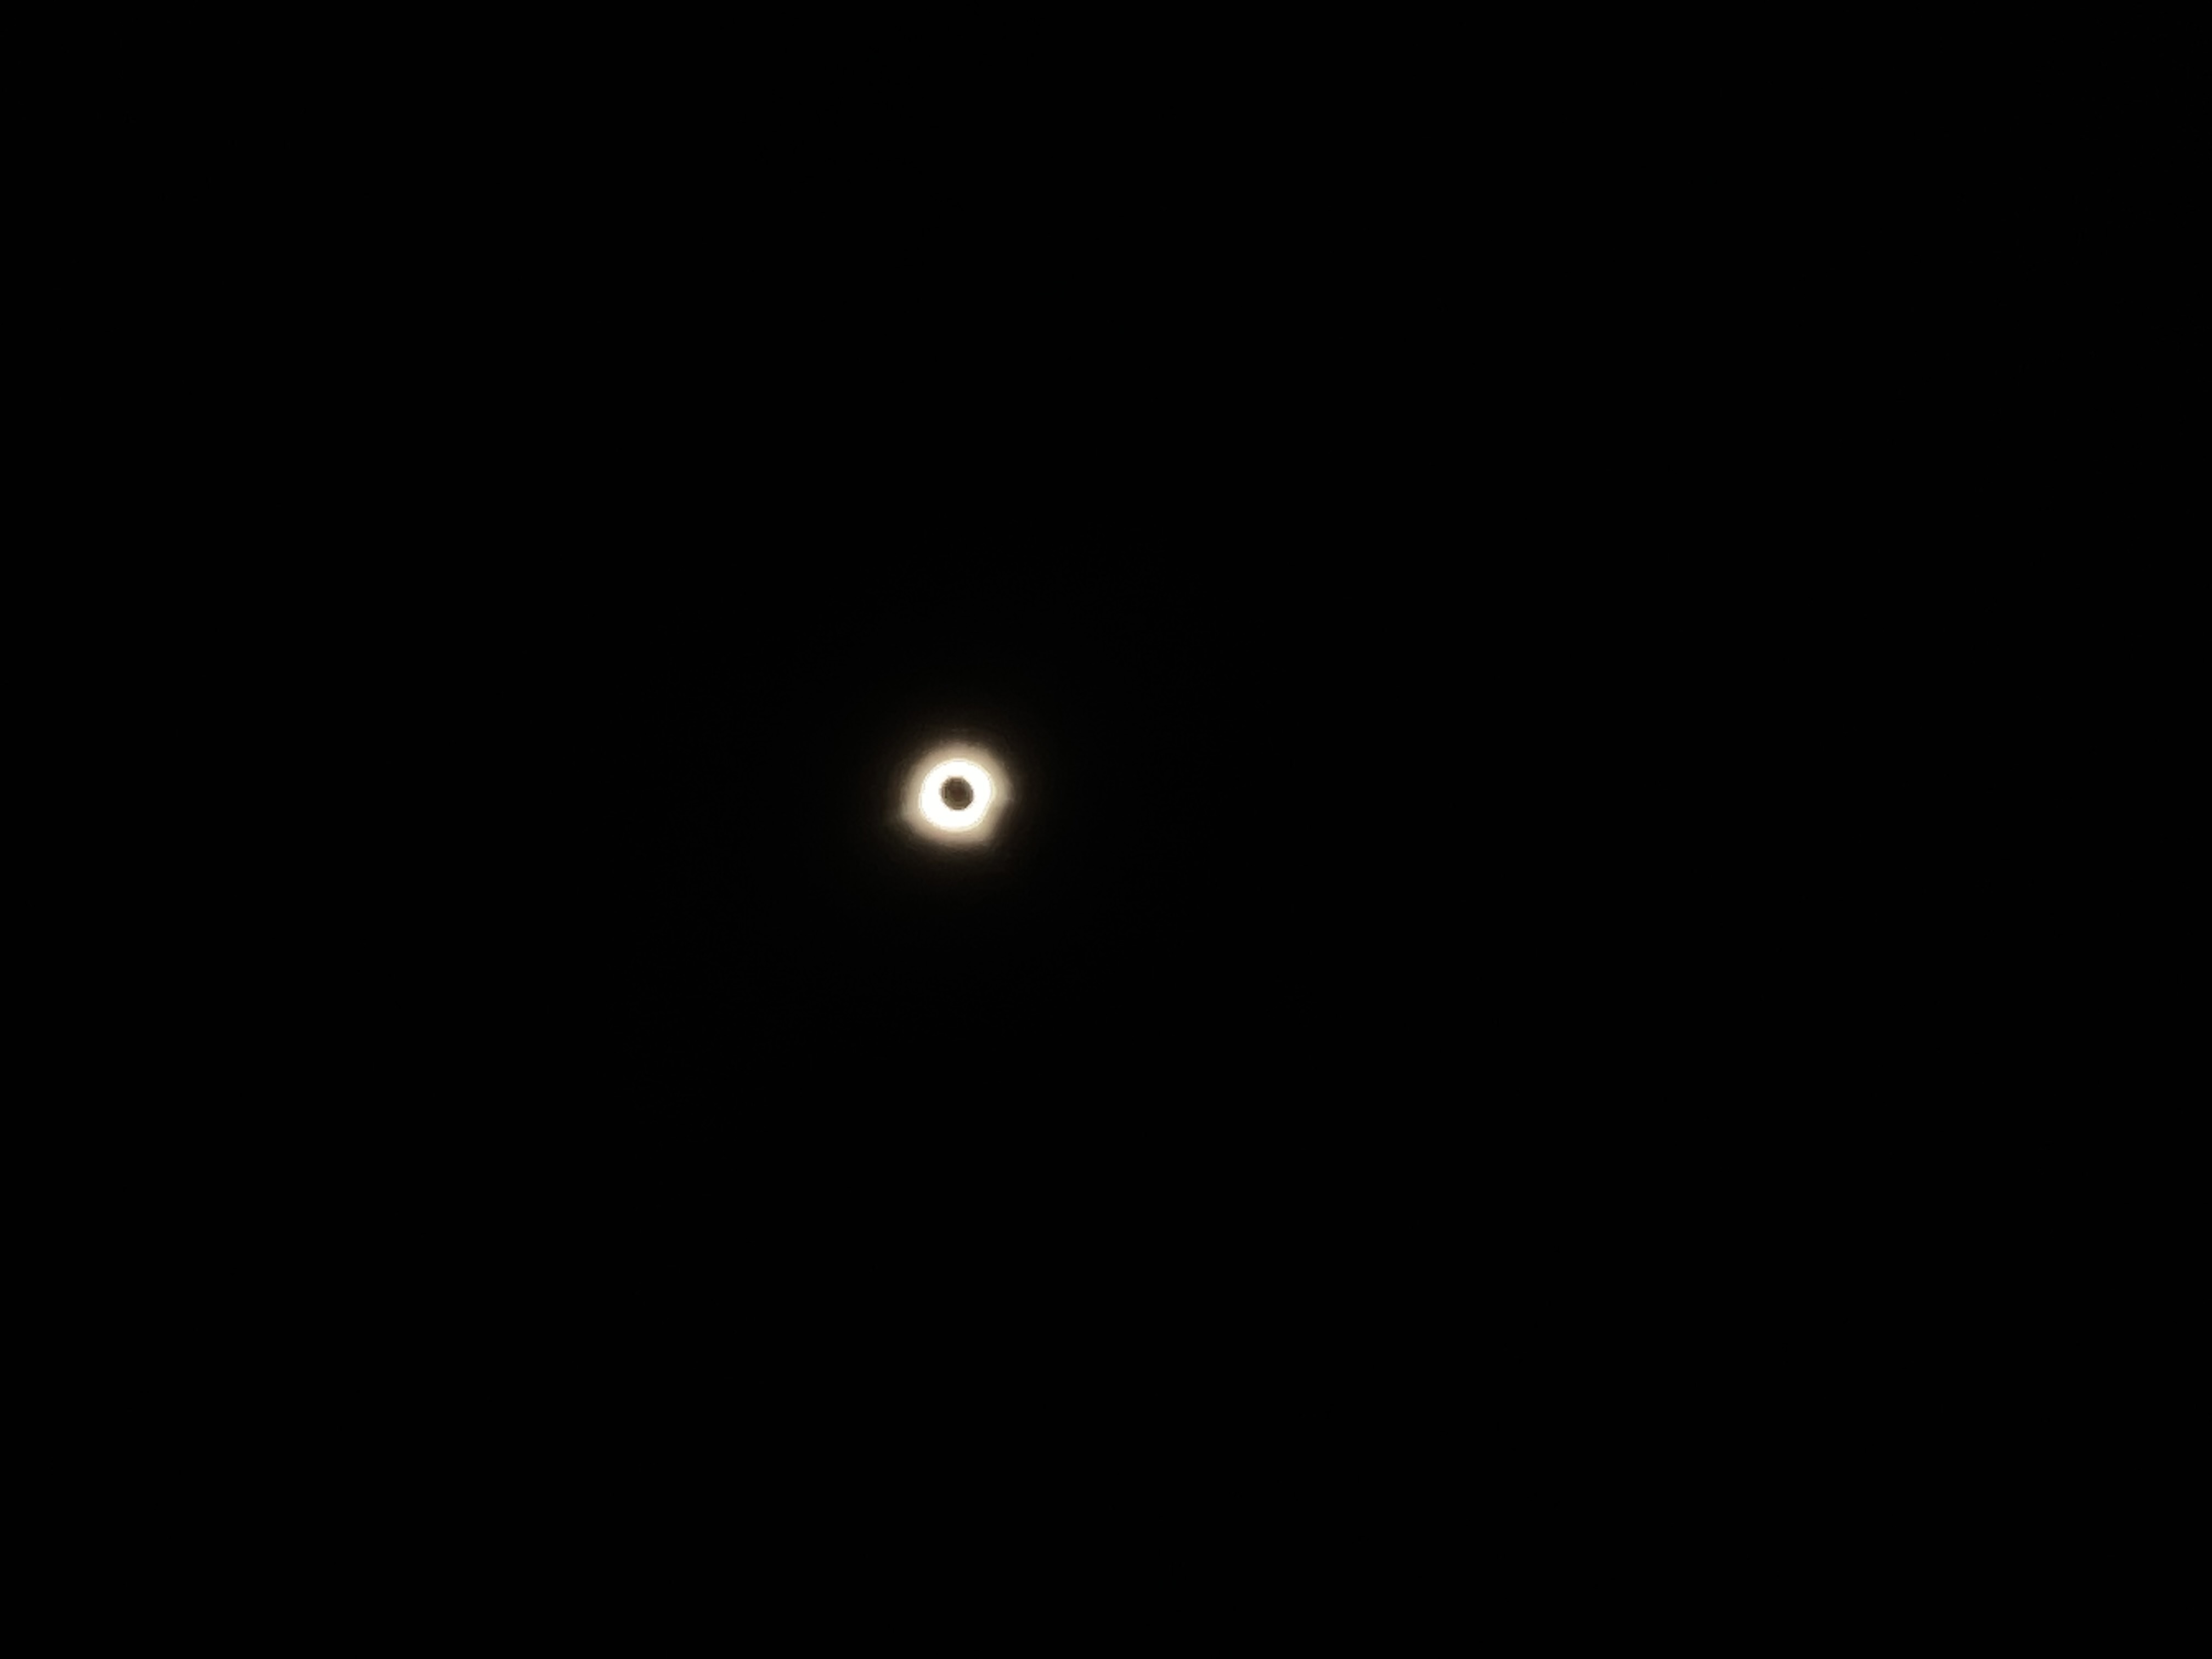 My iPhone photo of the eclipse